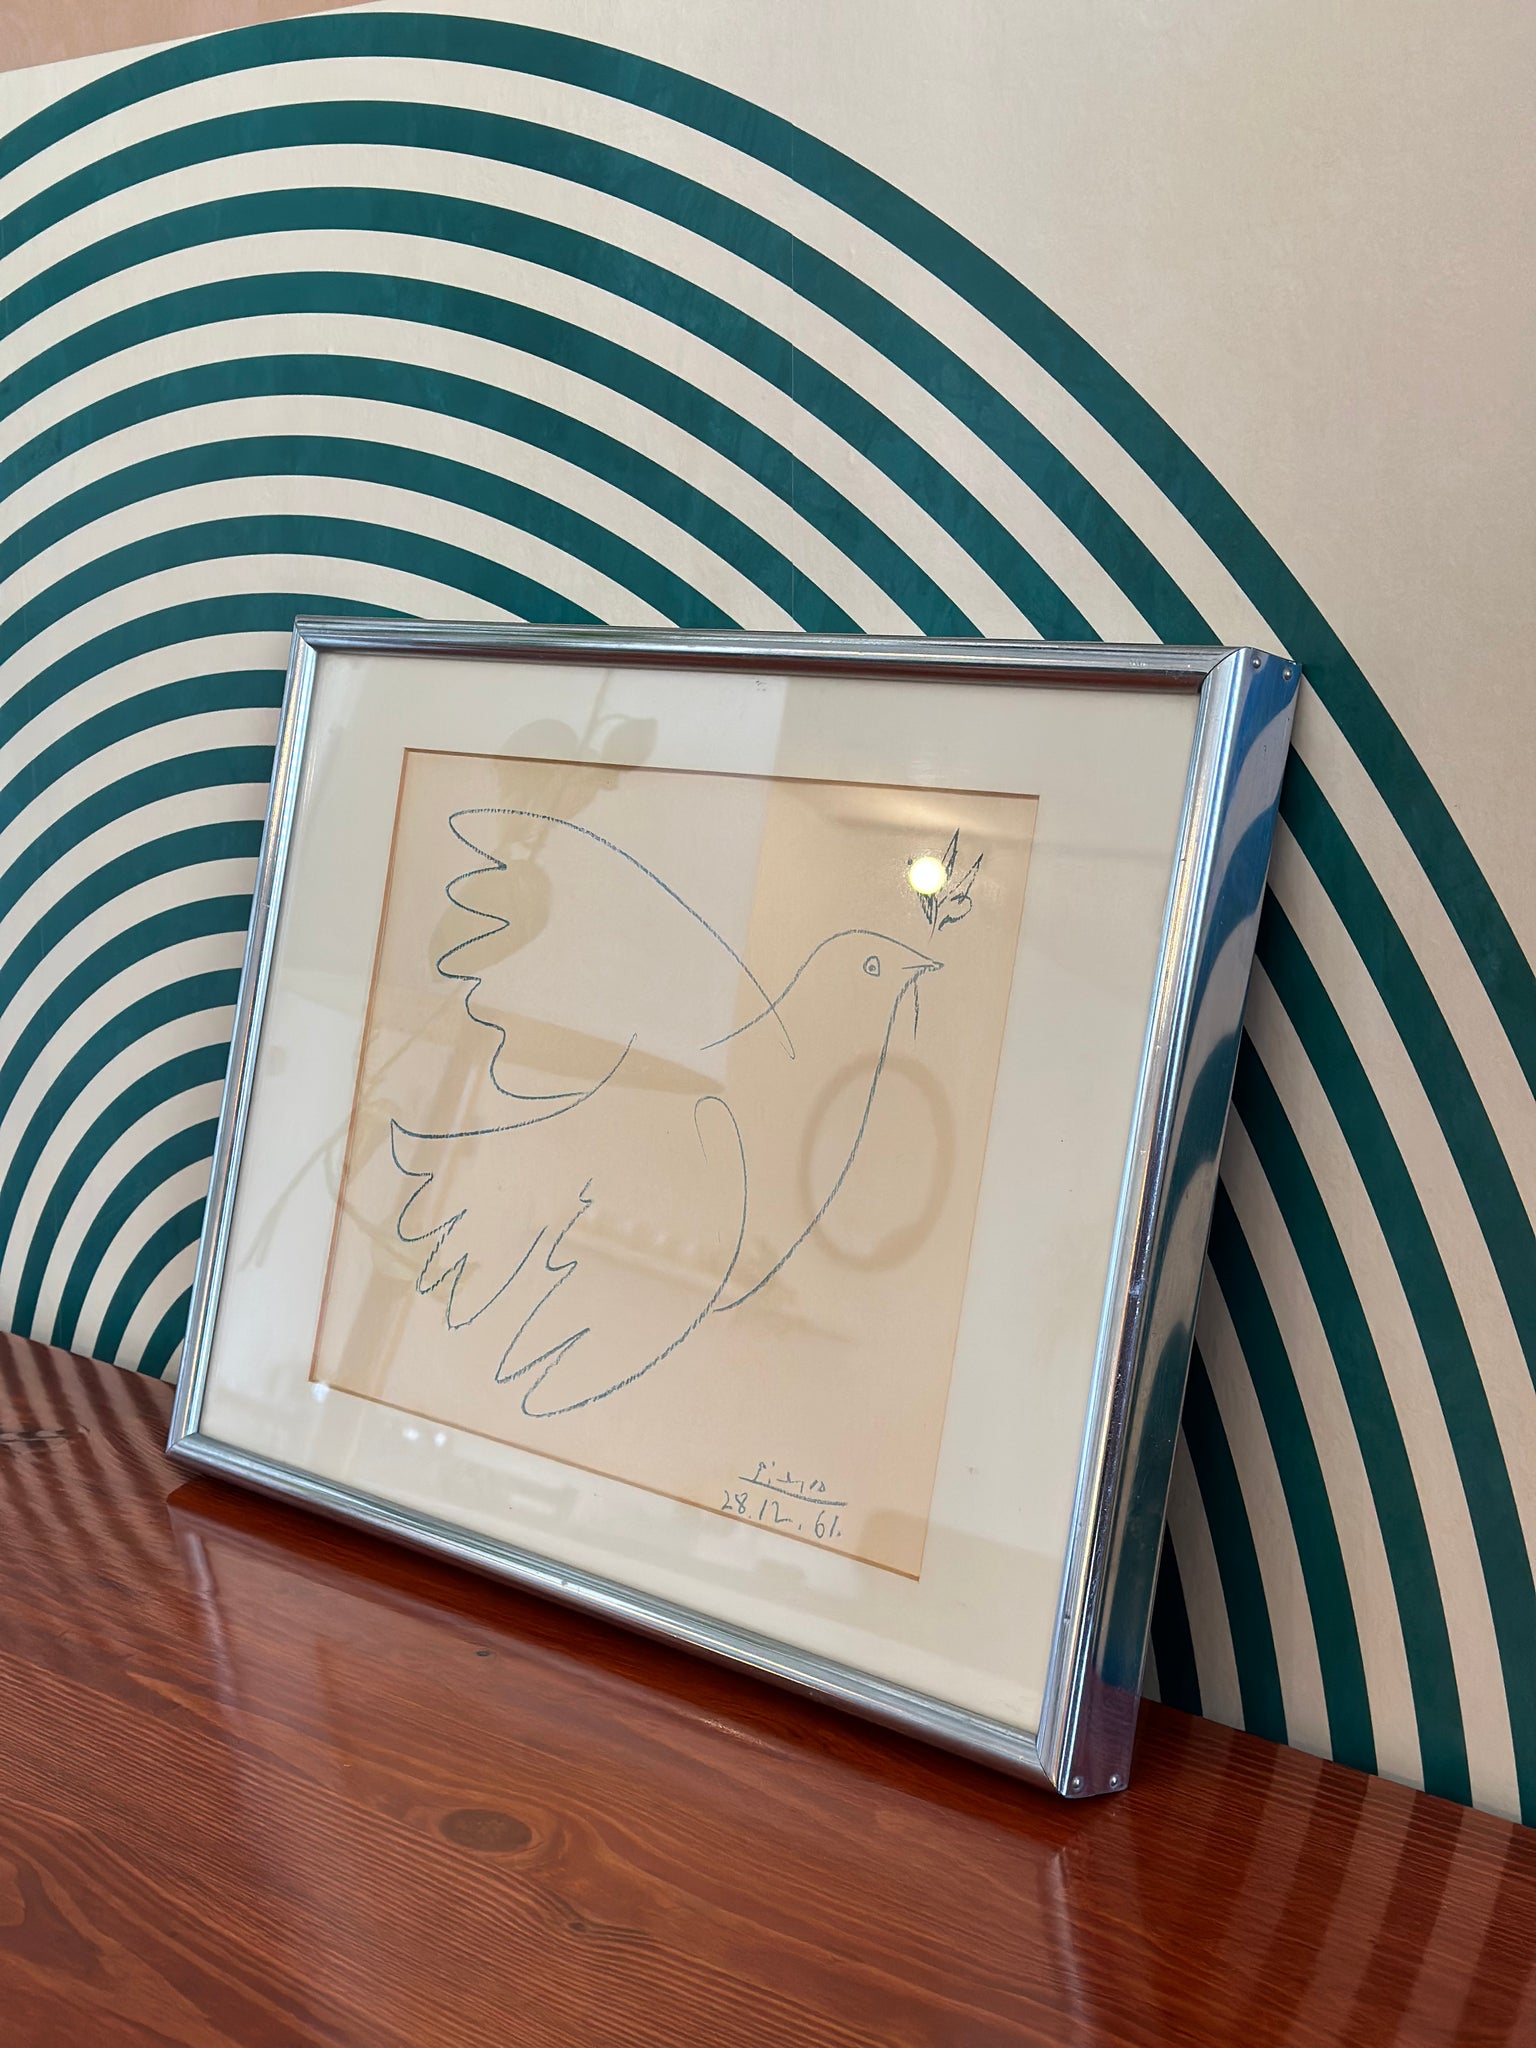 Vintage Picasso’s Iconic “Dove Of Peace” Lithograph